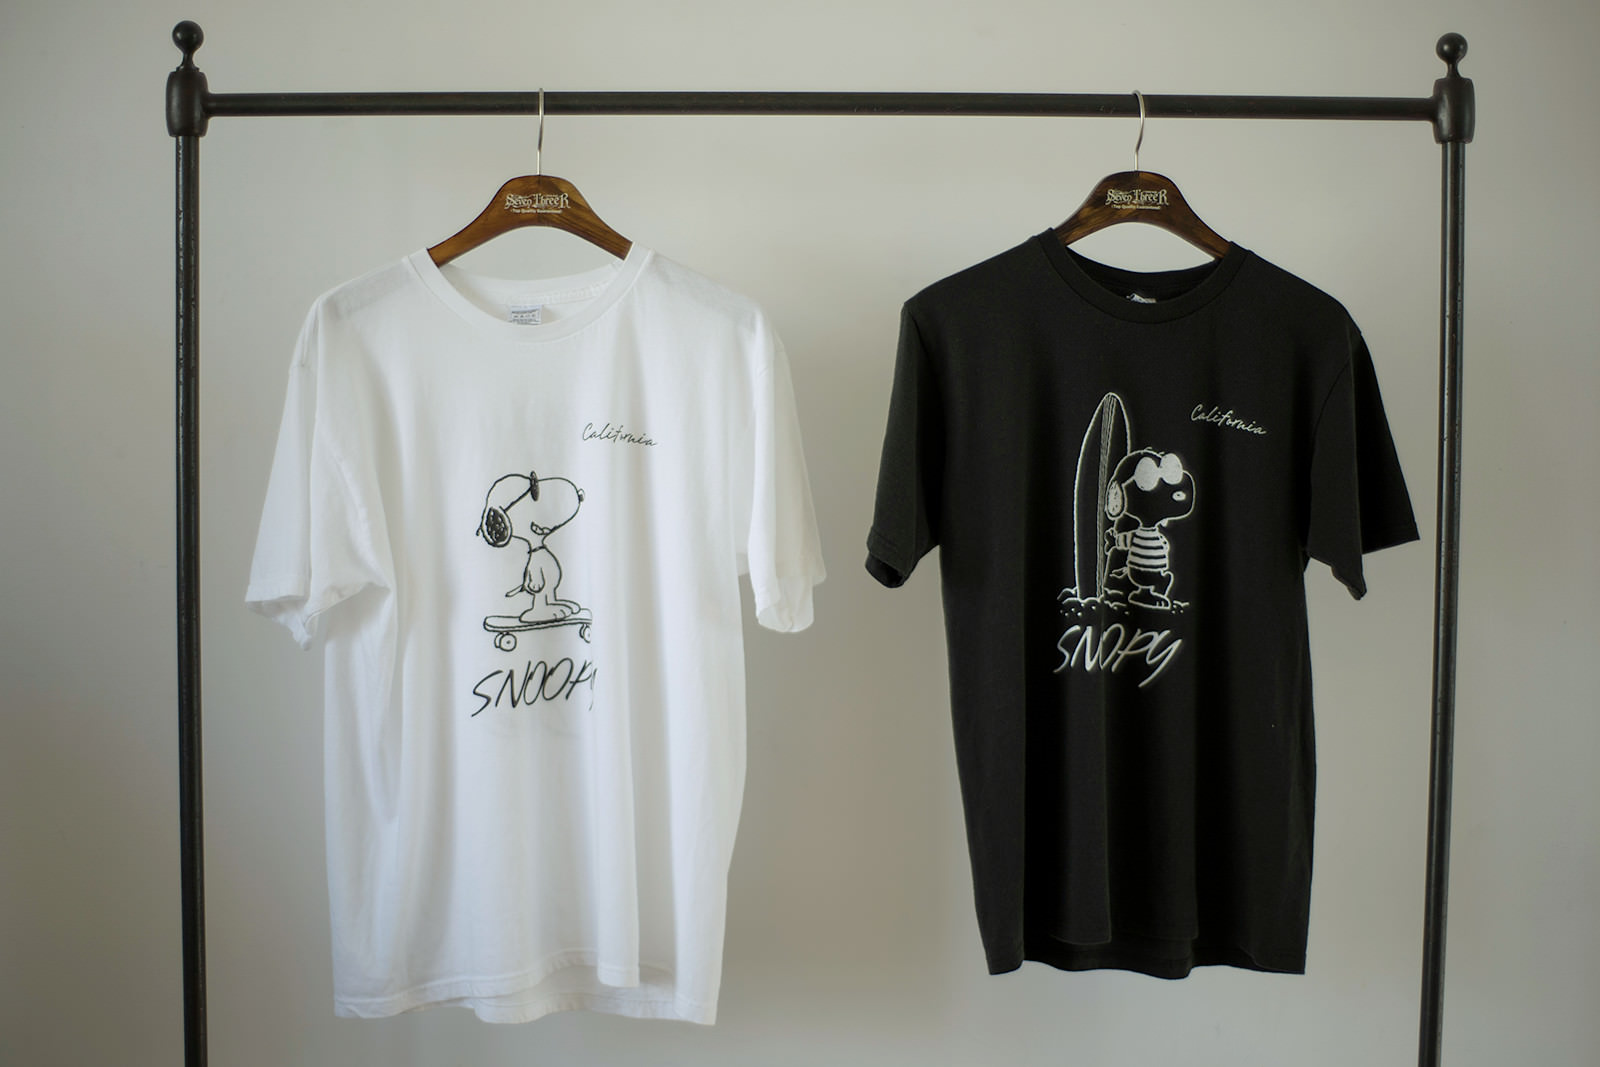 73R 2017 SUMMER COLLECTION #02 「SNOOPY X 73R」